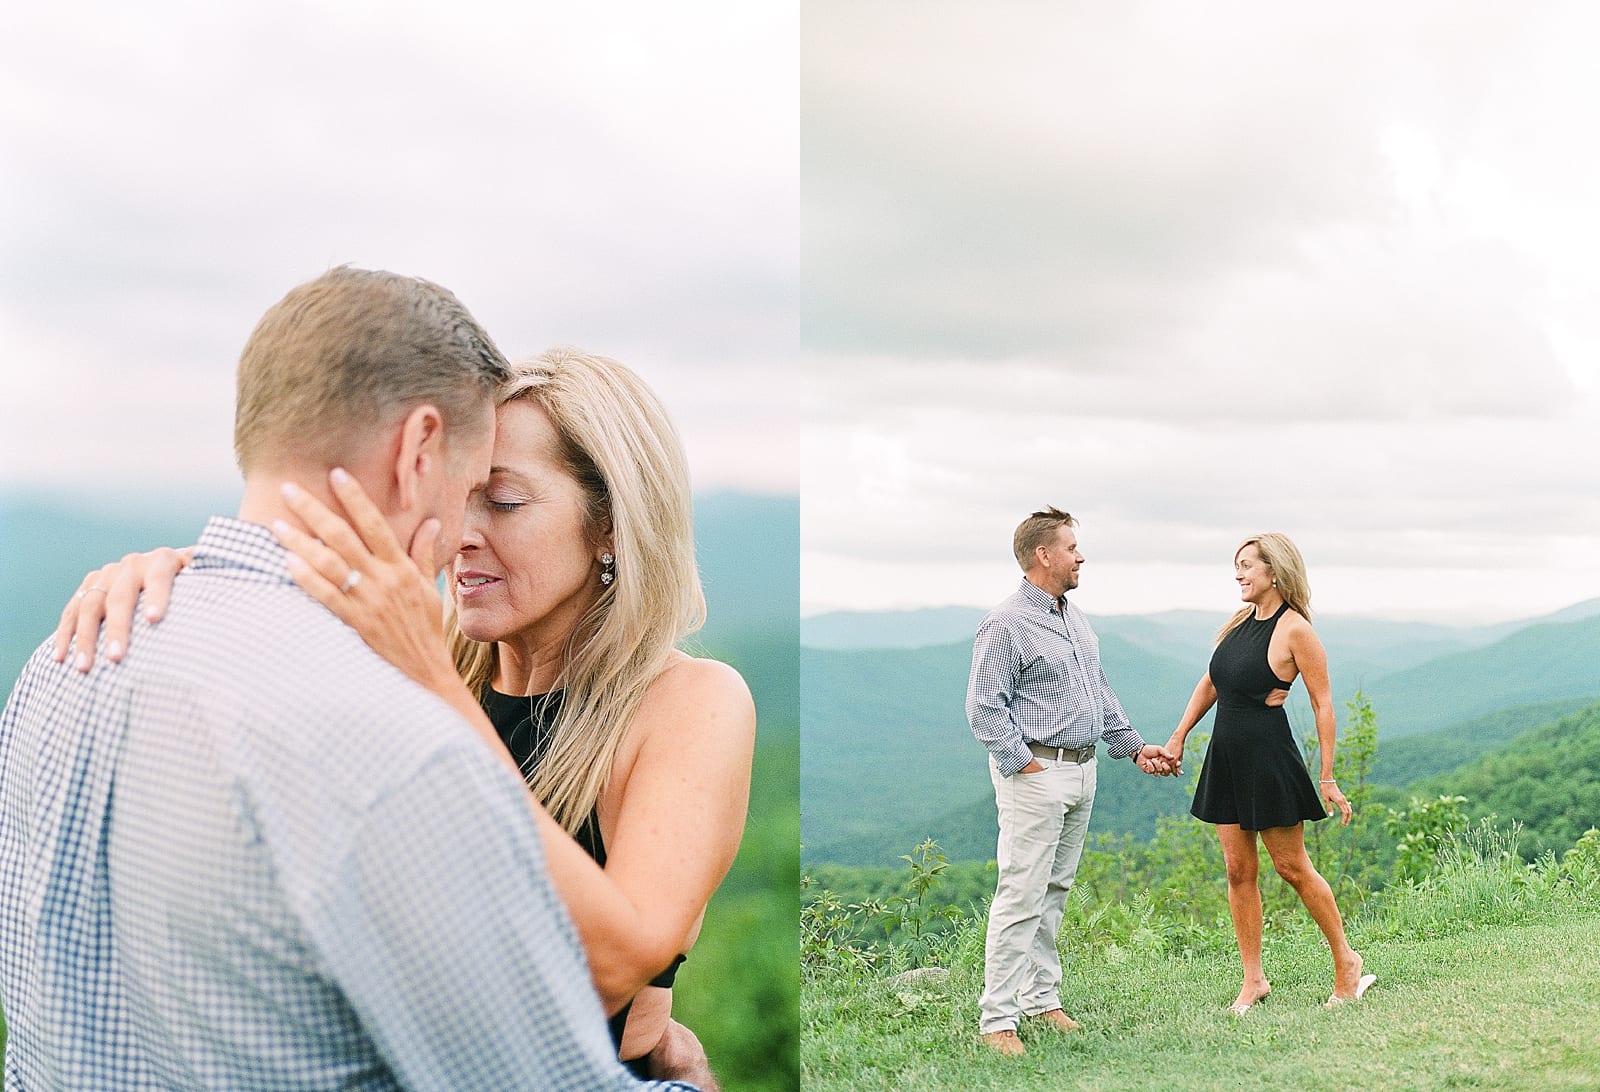 Blue Ridge Parkway Pisgah Inn Couple Snuggling and Holding Hands Photos